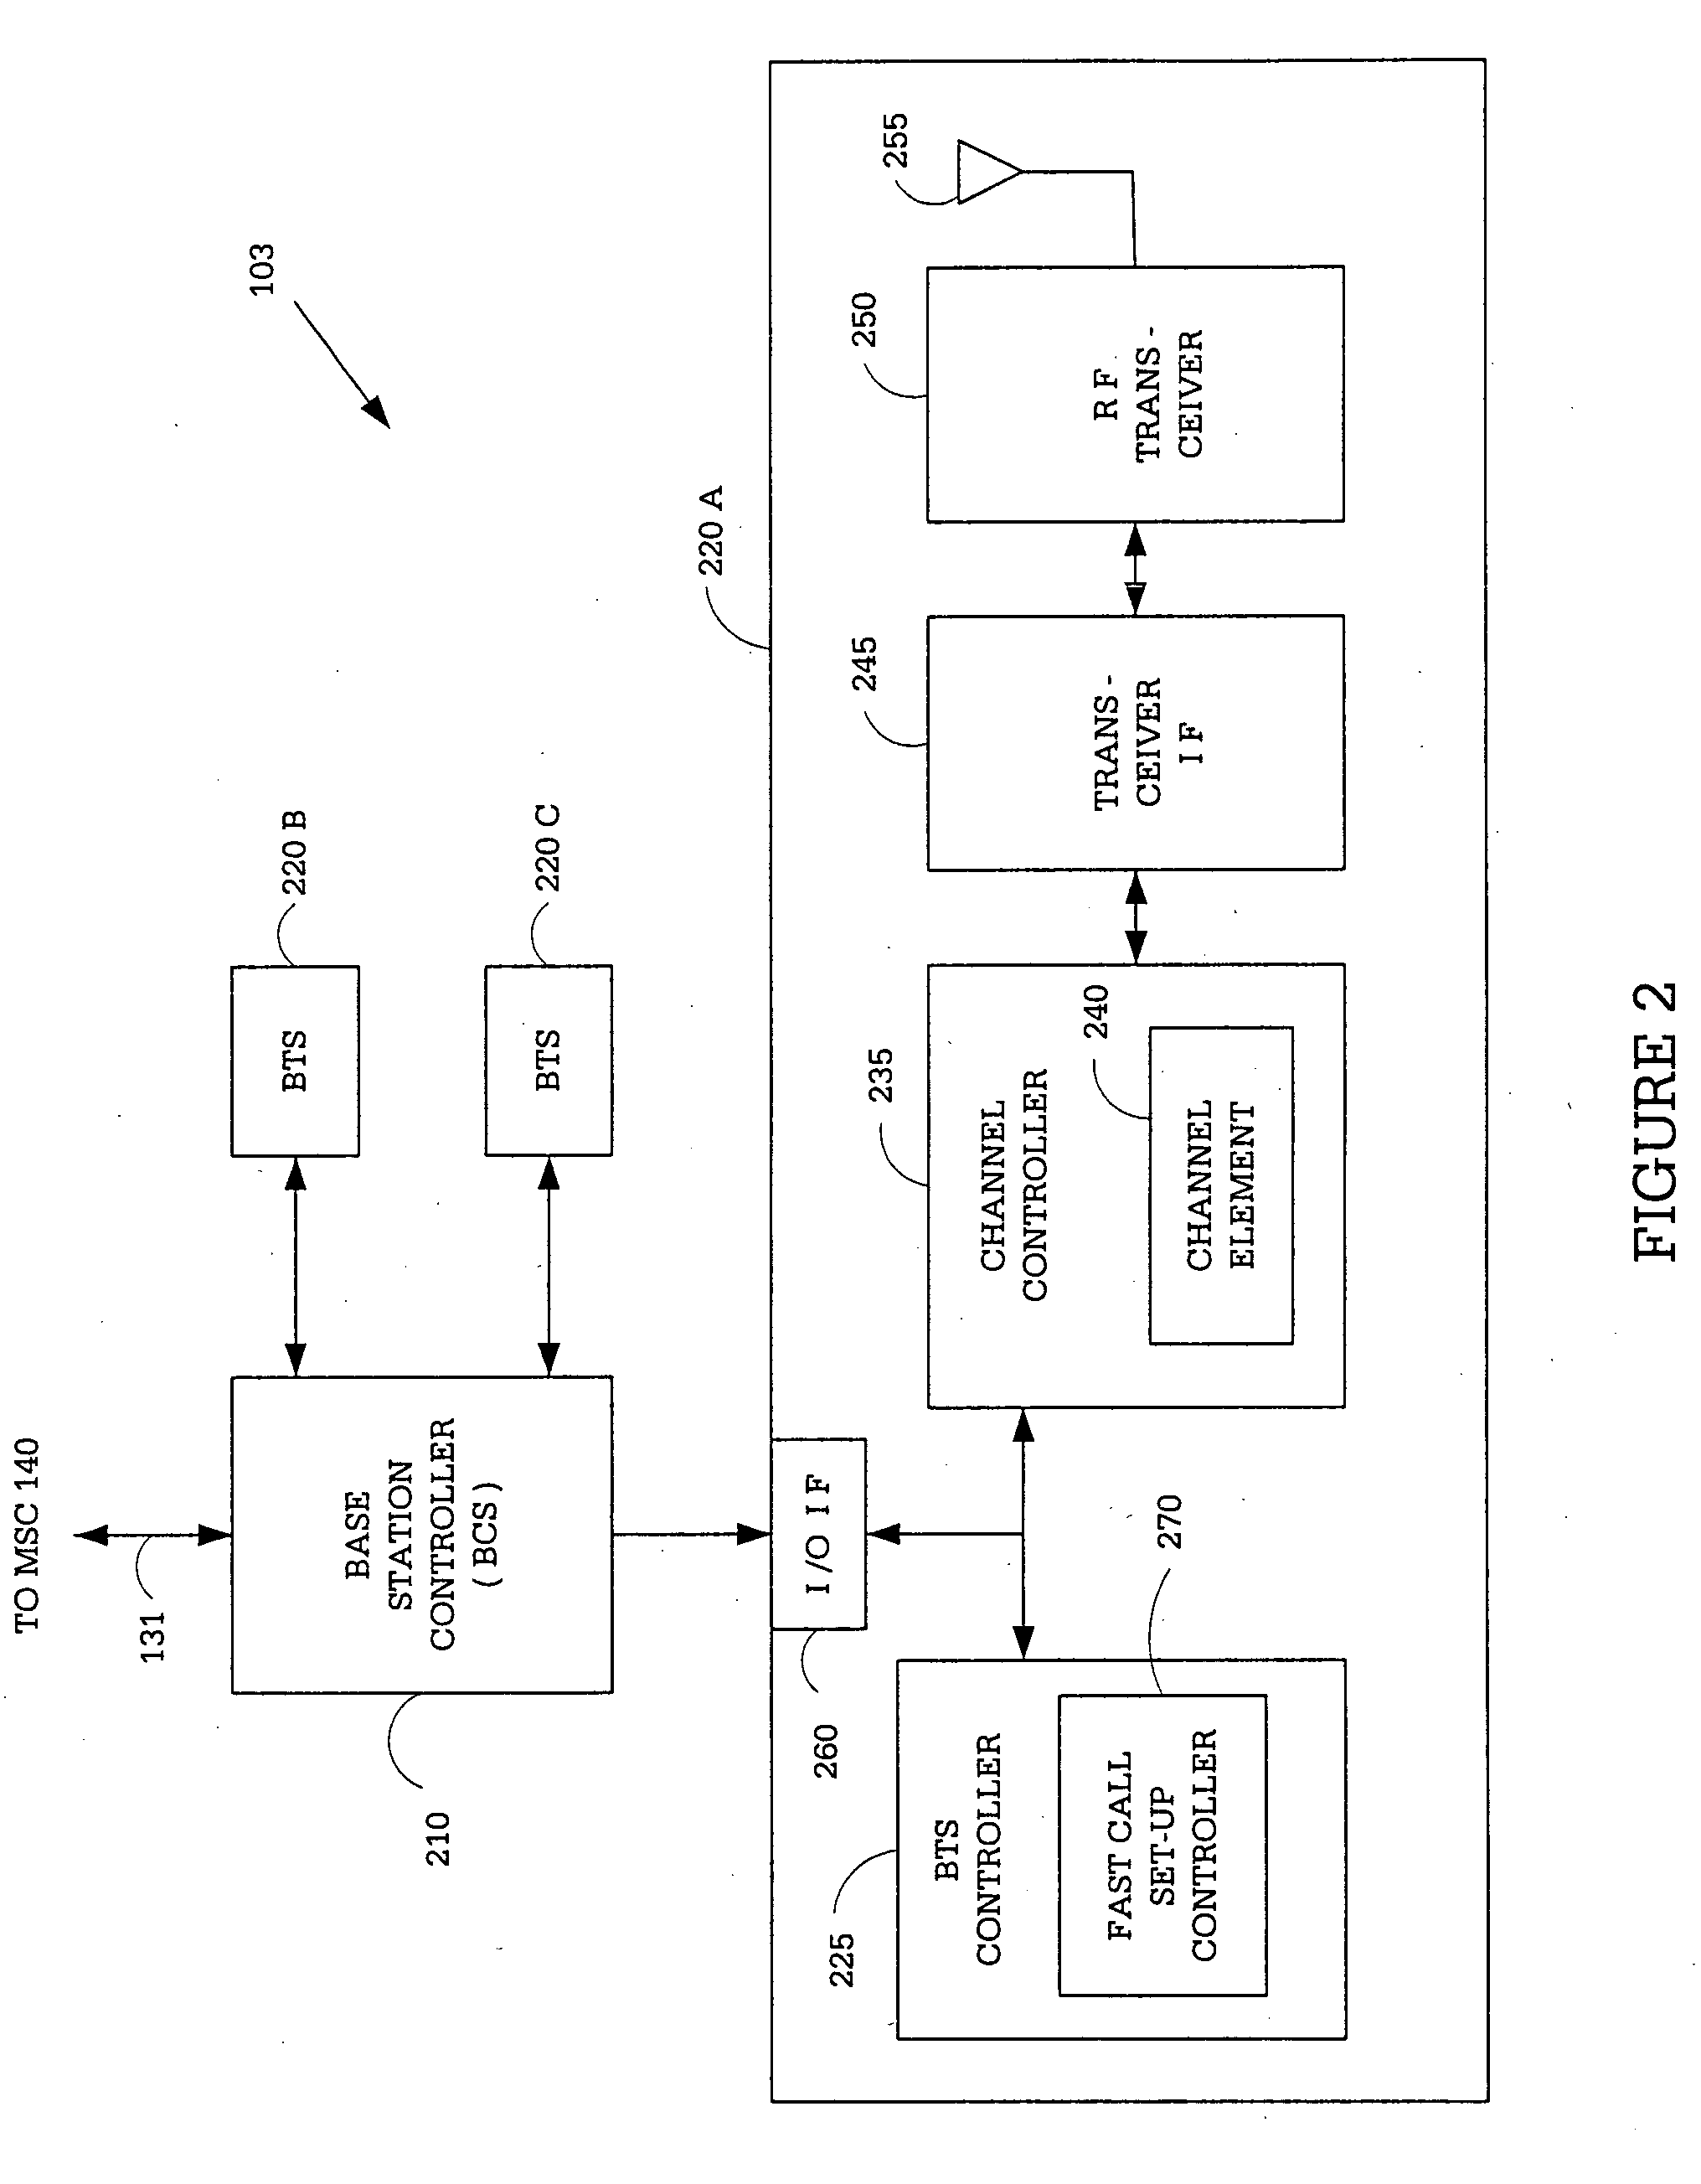 System and method for providing fast call set-up in a wireless communication system